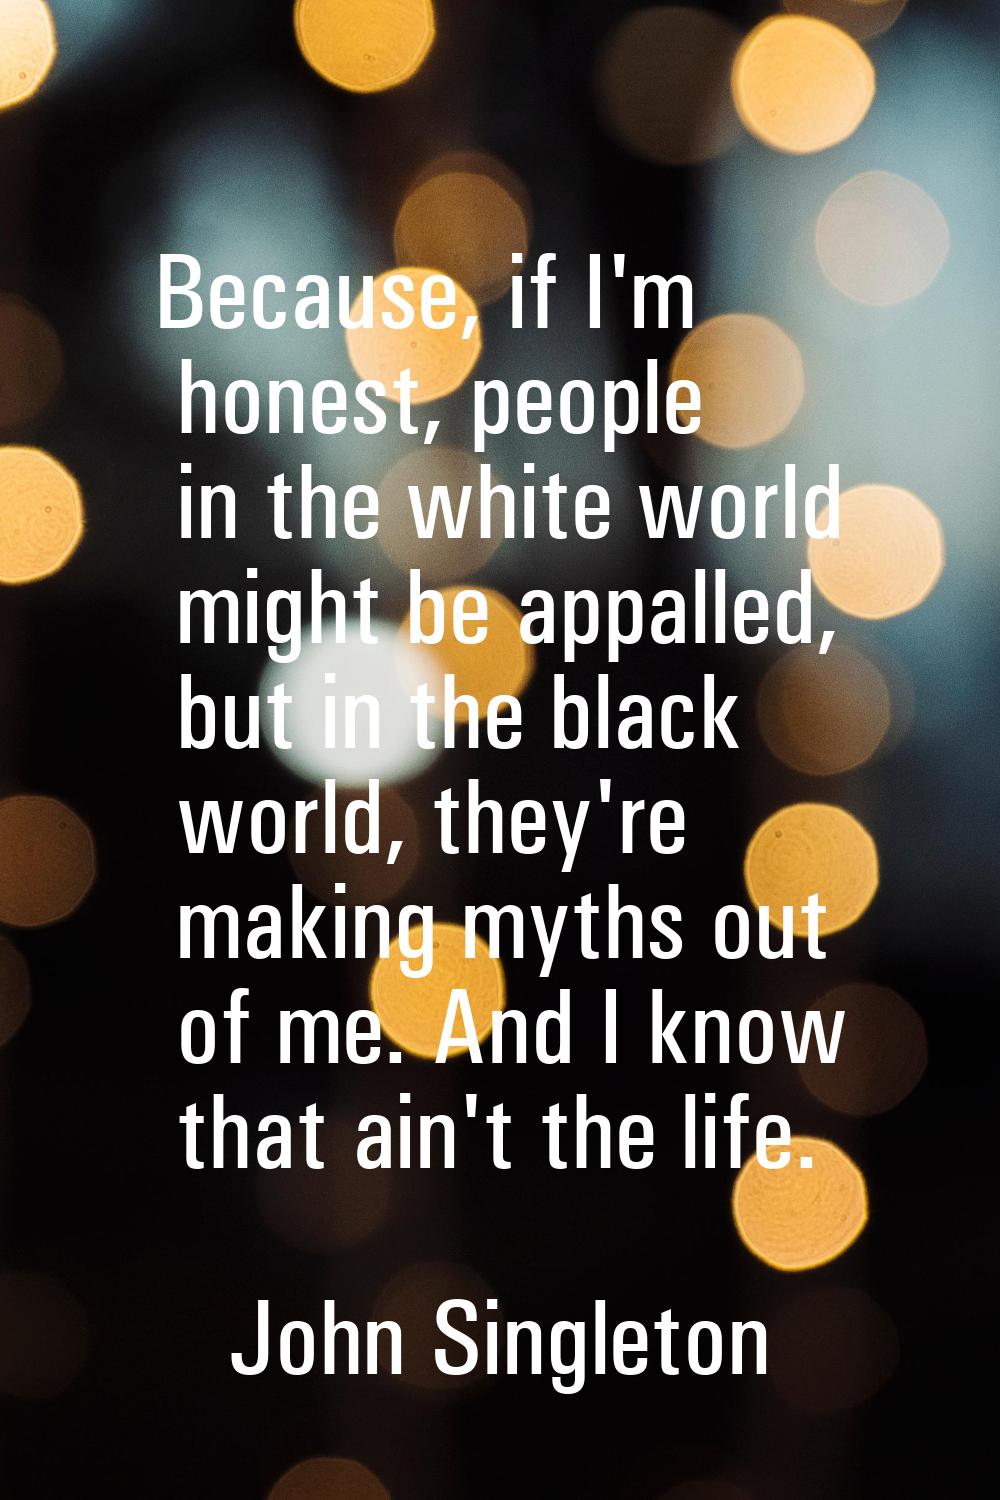 Because, if I'm honest, people in the white world might be appalled, but in the black world, they'r